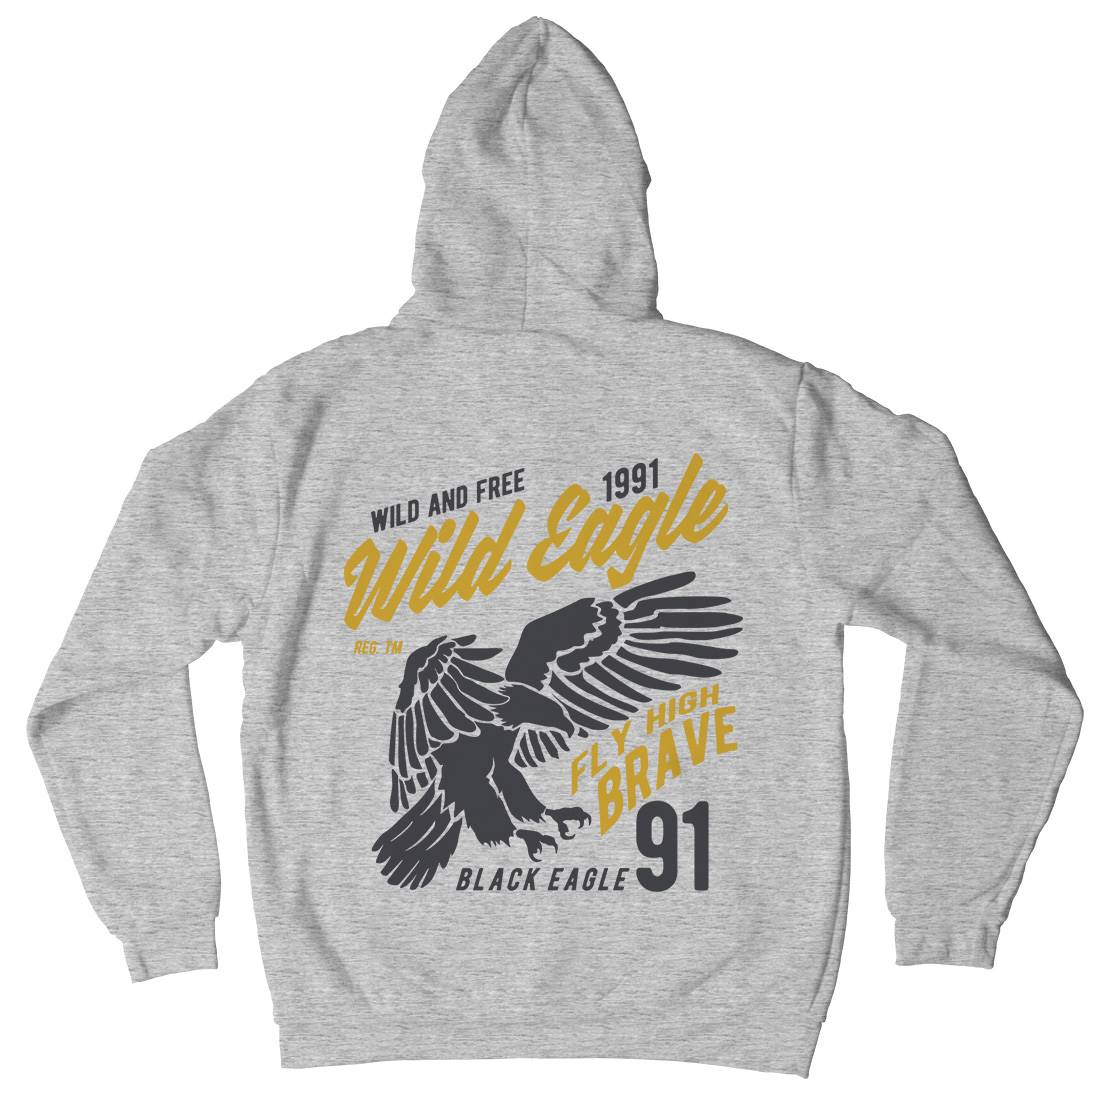 Wild Eagle Mens Hoodie With Pocket Animals B270